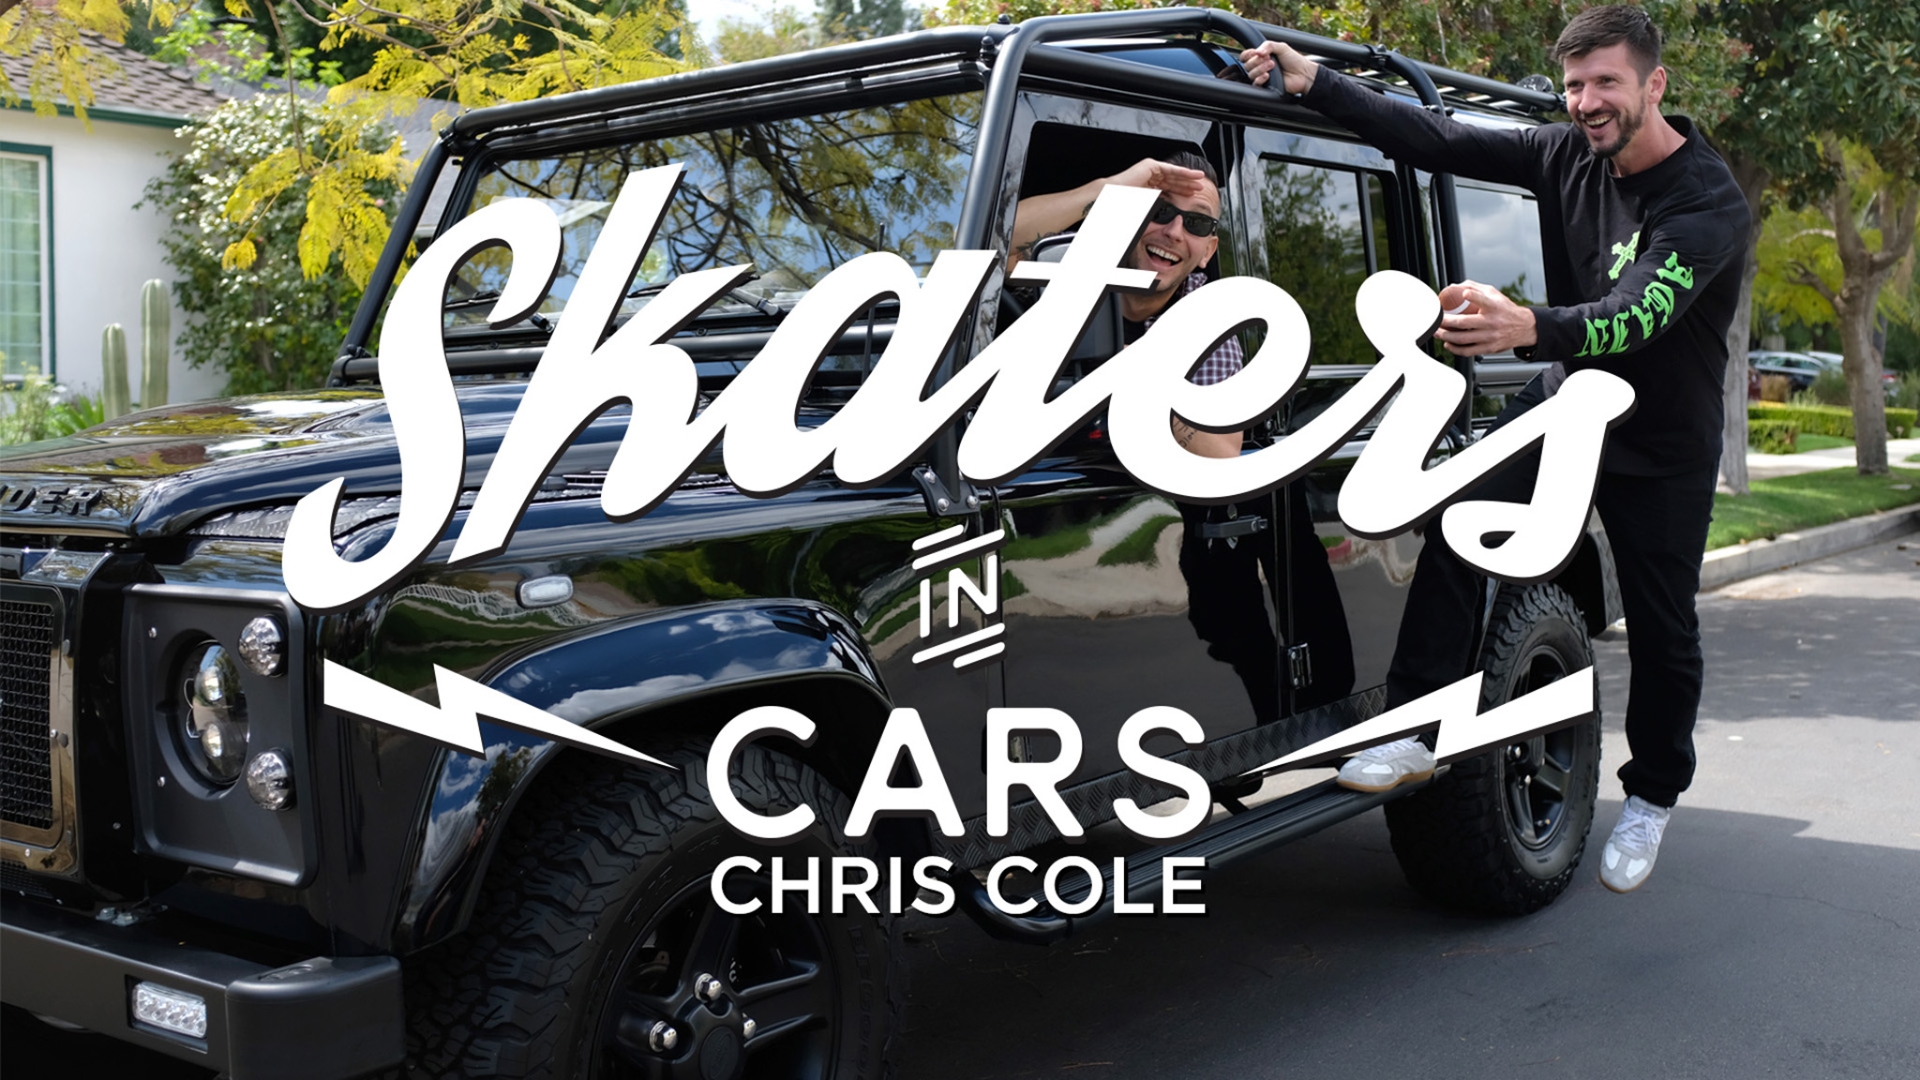 Skaters In Cars Looking At Spots: Chris Cole